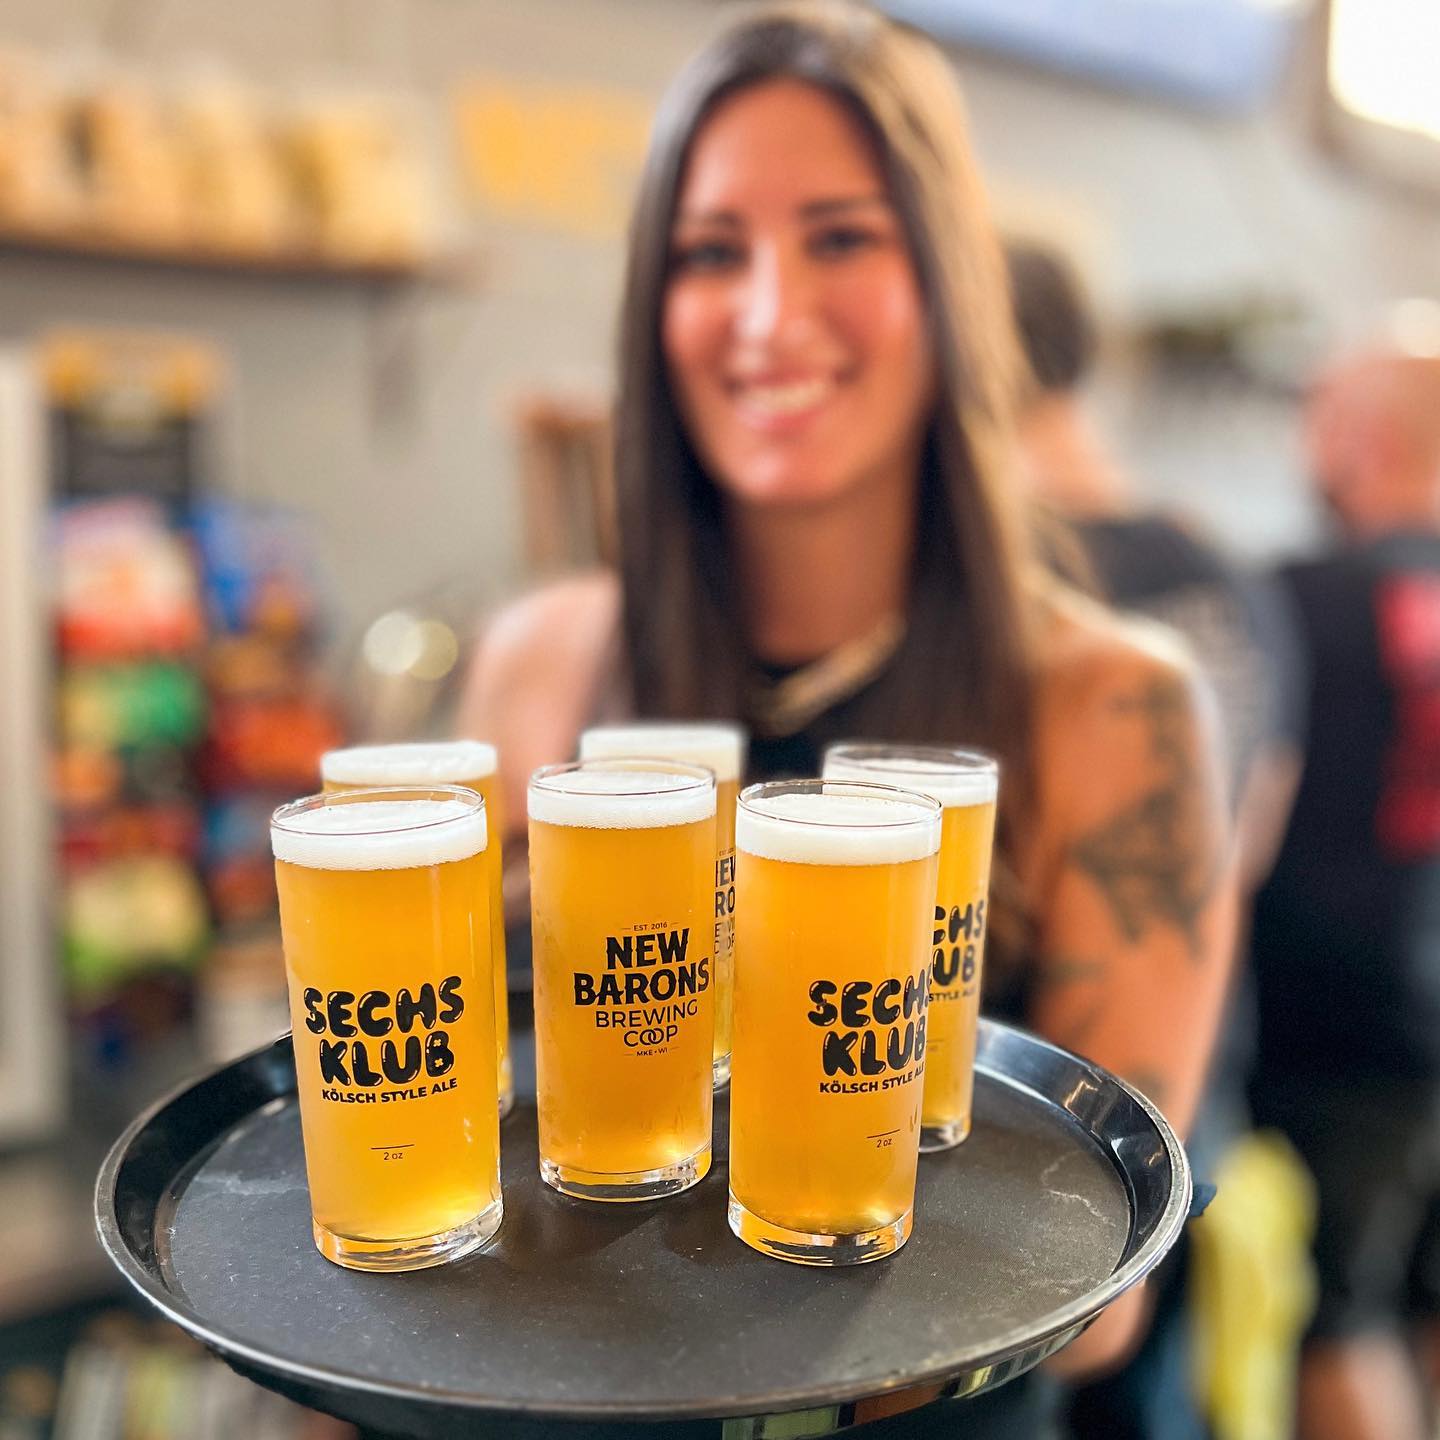 You may have missed one hell of a release party but we’ve still got some strange glasses for sale! Stop in the taproom today to enjoy a Sechs Klub and keep a glass! Open from 1-6🍻❌